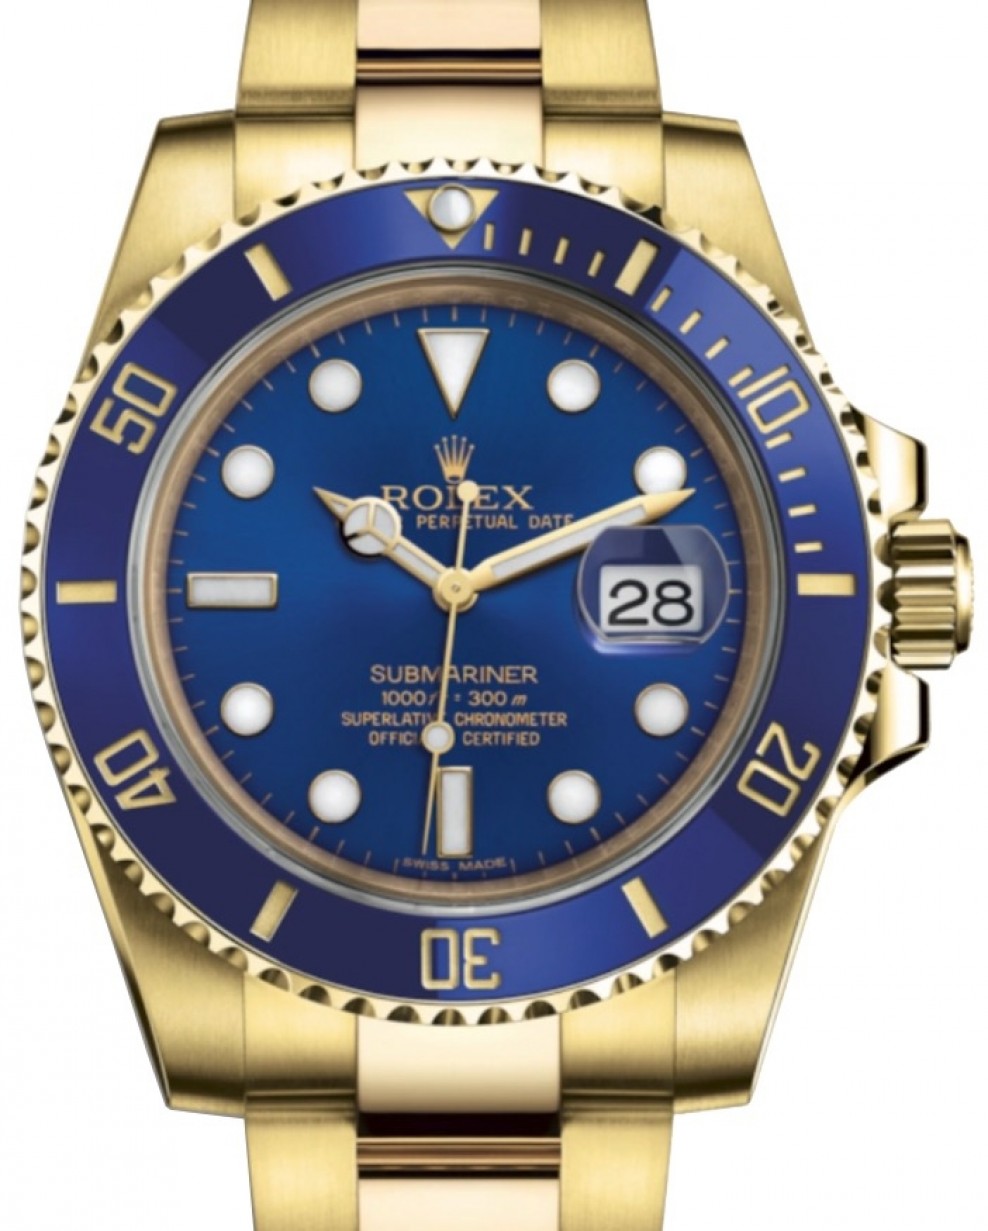 how much is a blue face rolex